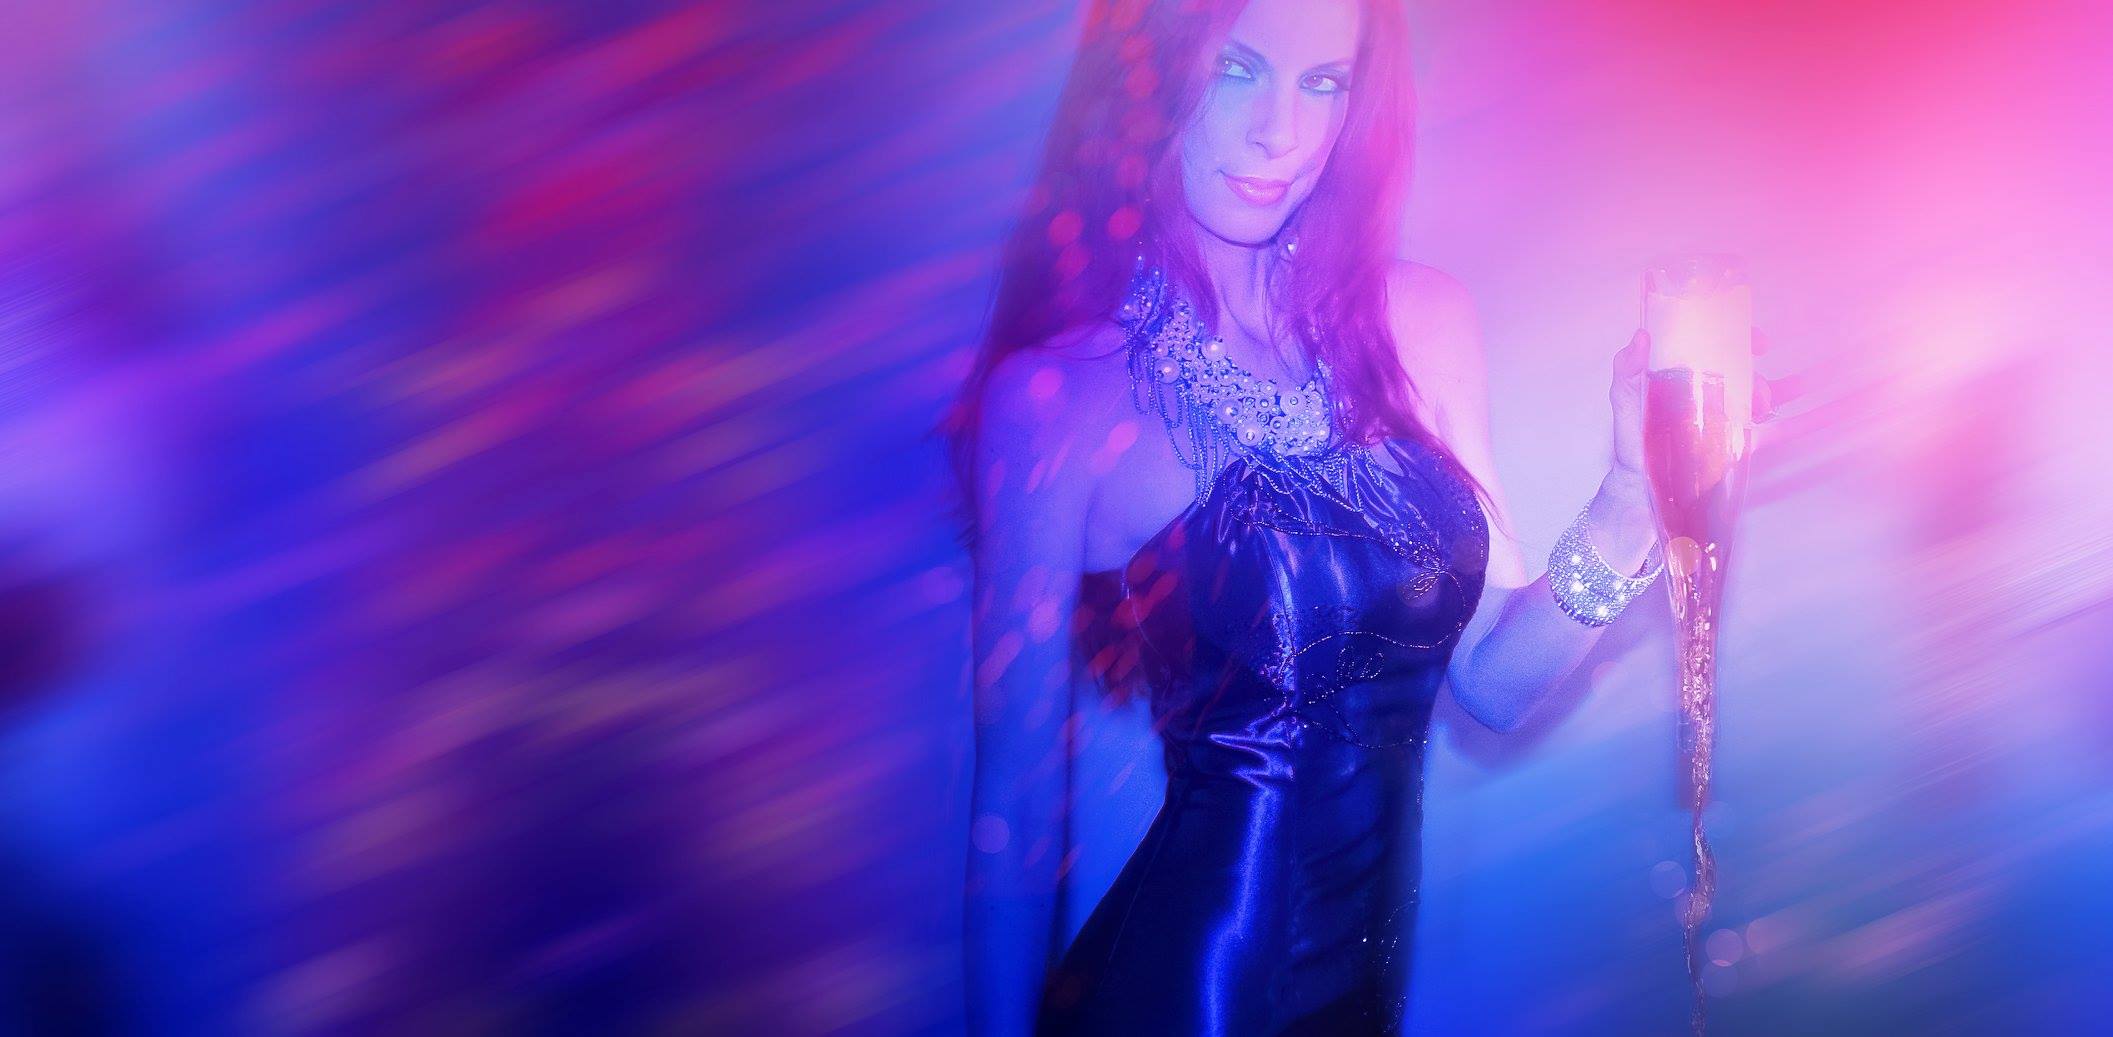 IMAGES OF JENMEDIA (JENMEDIA.NET) / PRIOR SOCIAL WEB CAMPAIGN / IN GRAPE PURSUIT / JENMEDIA WEARING A DRESS #RAREOCCURENCES